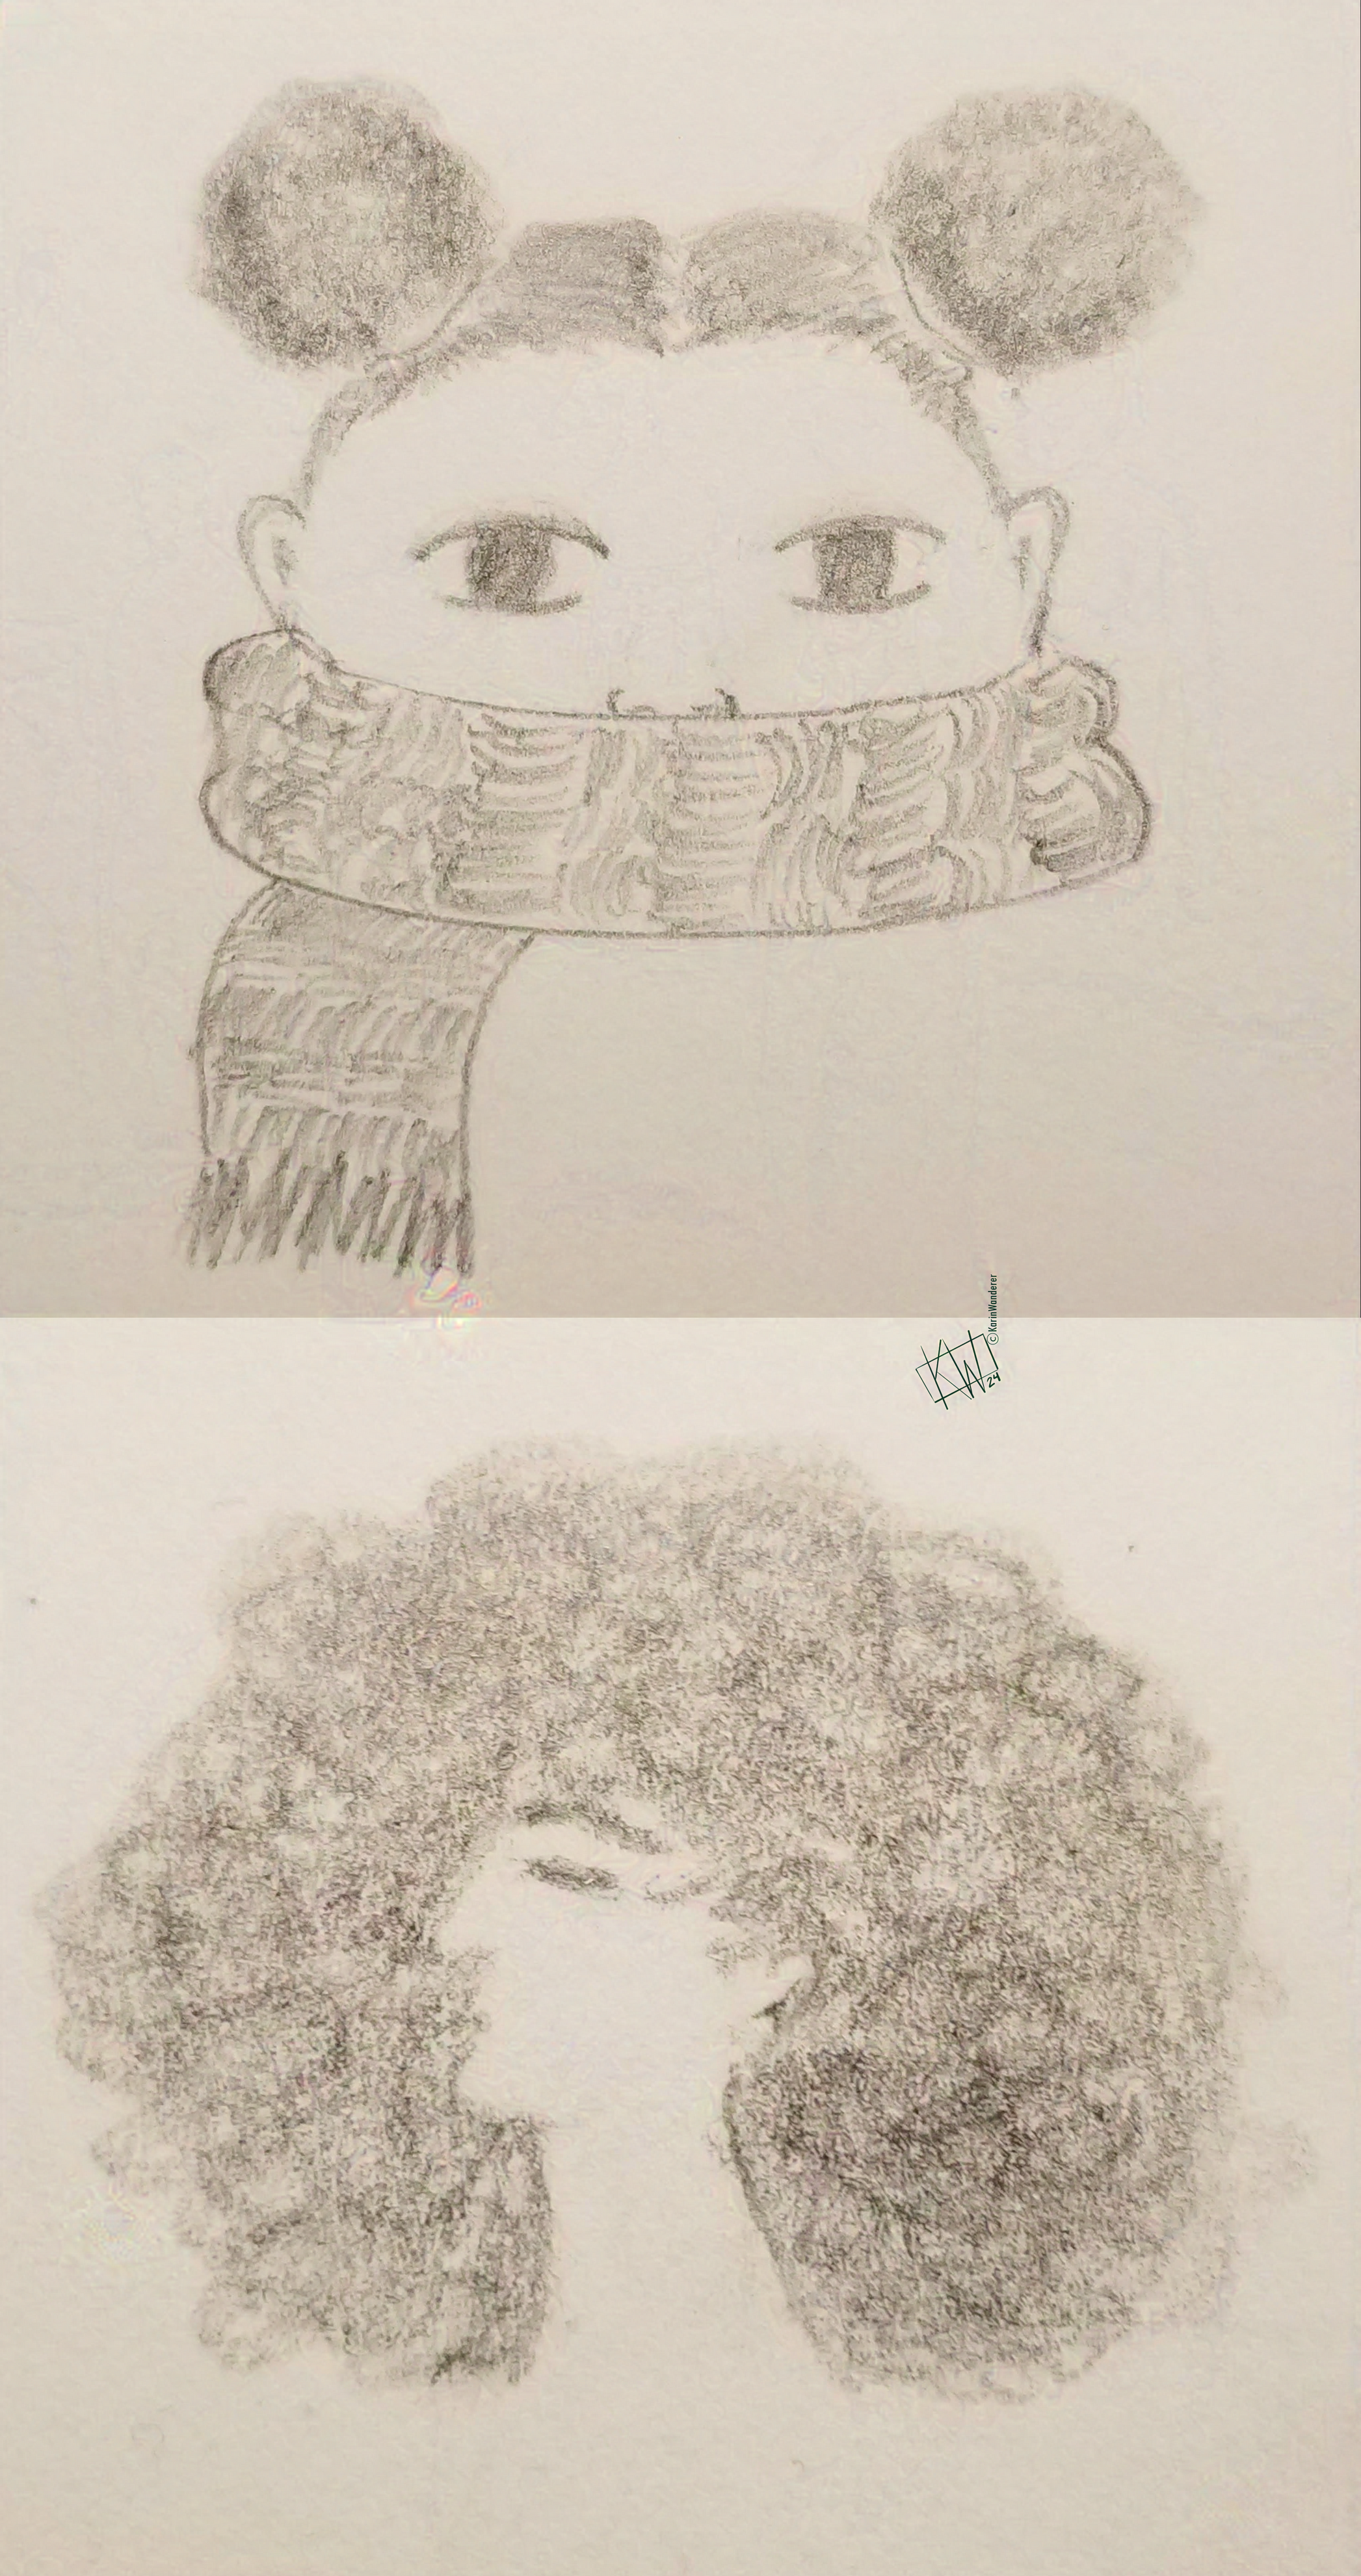 2 pencil sketches: 1 is a little girl with her hair in twin buns. Most of her face is hidden in a scarf. 2 is a stylized person with an enormous head of curls framing their face, shown in profile.